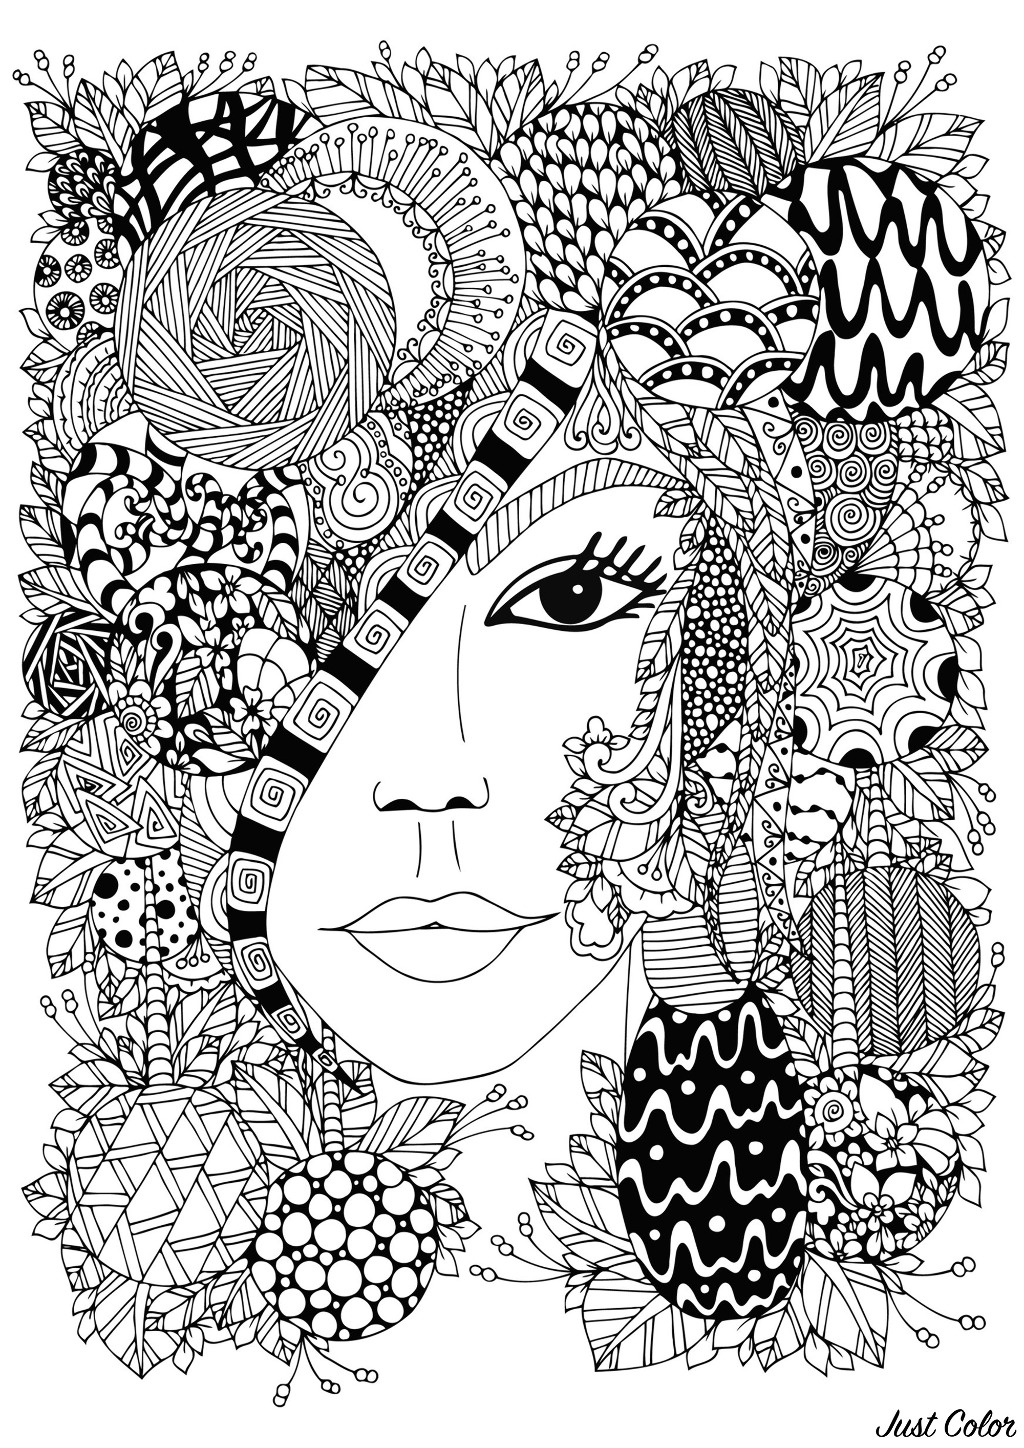 Elegant female face partially hidden by many Zentangle patterns